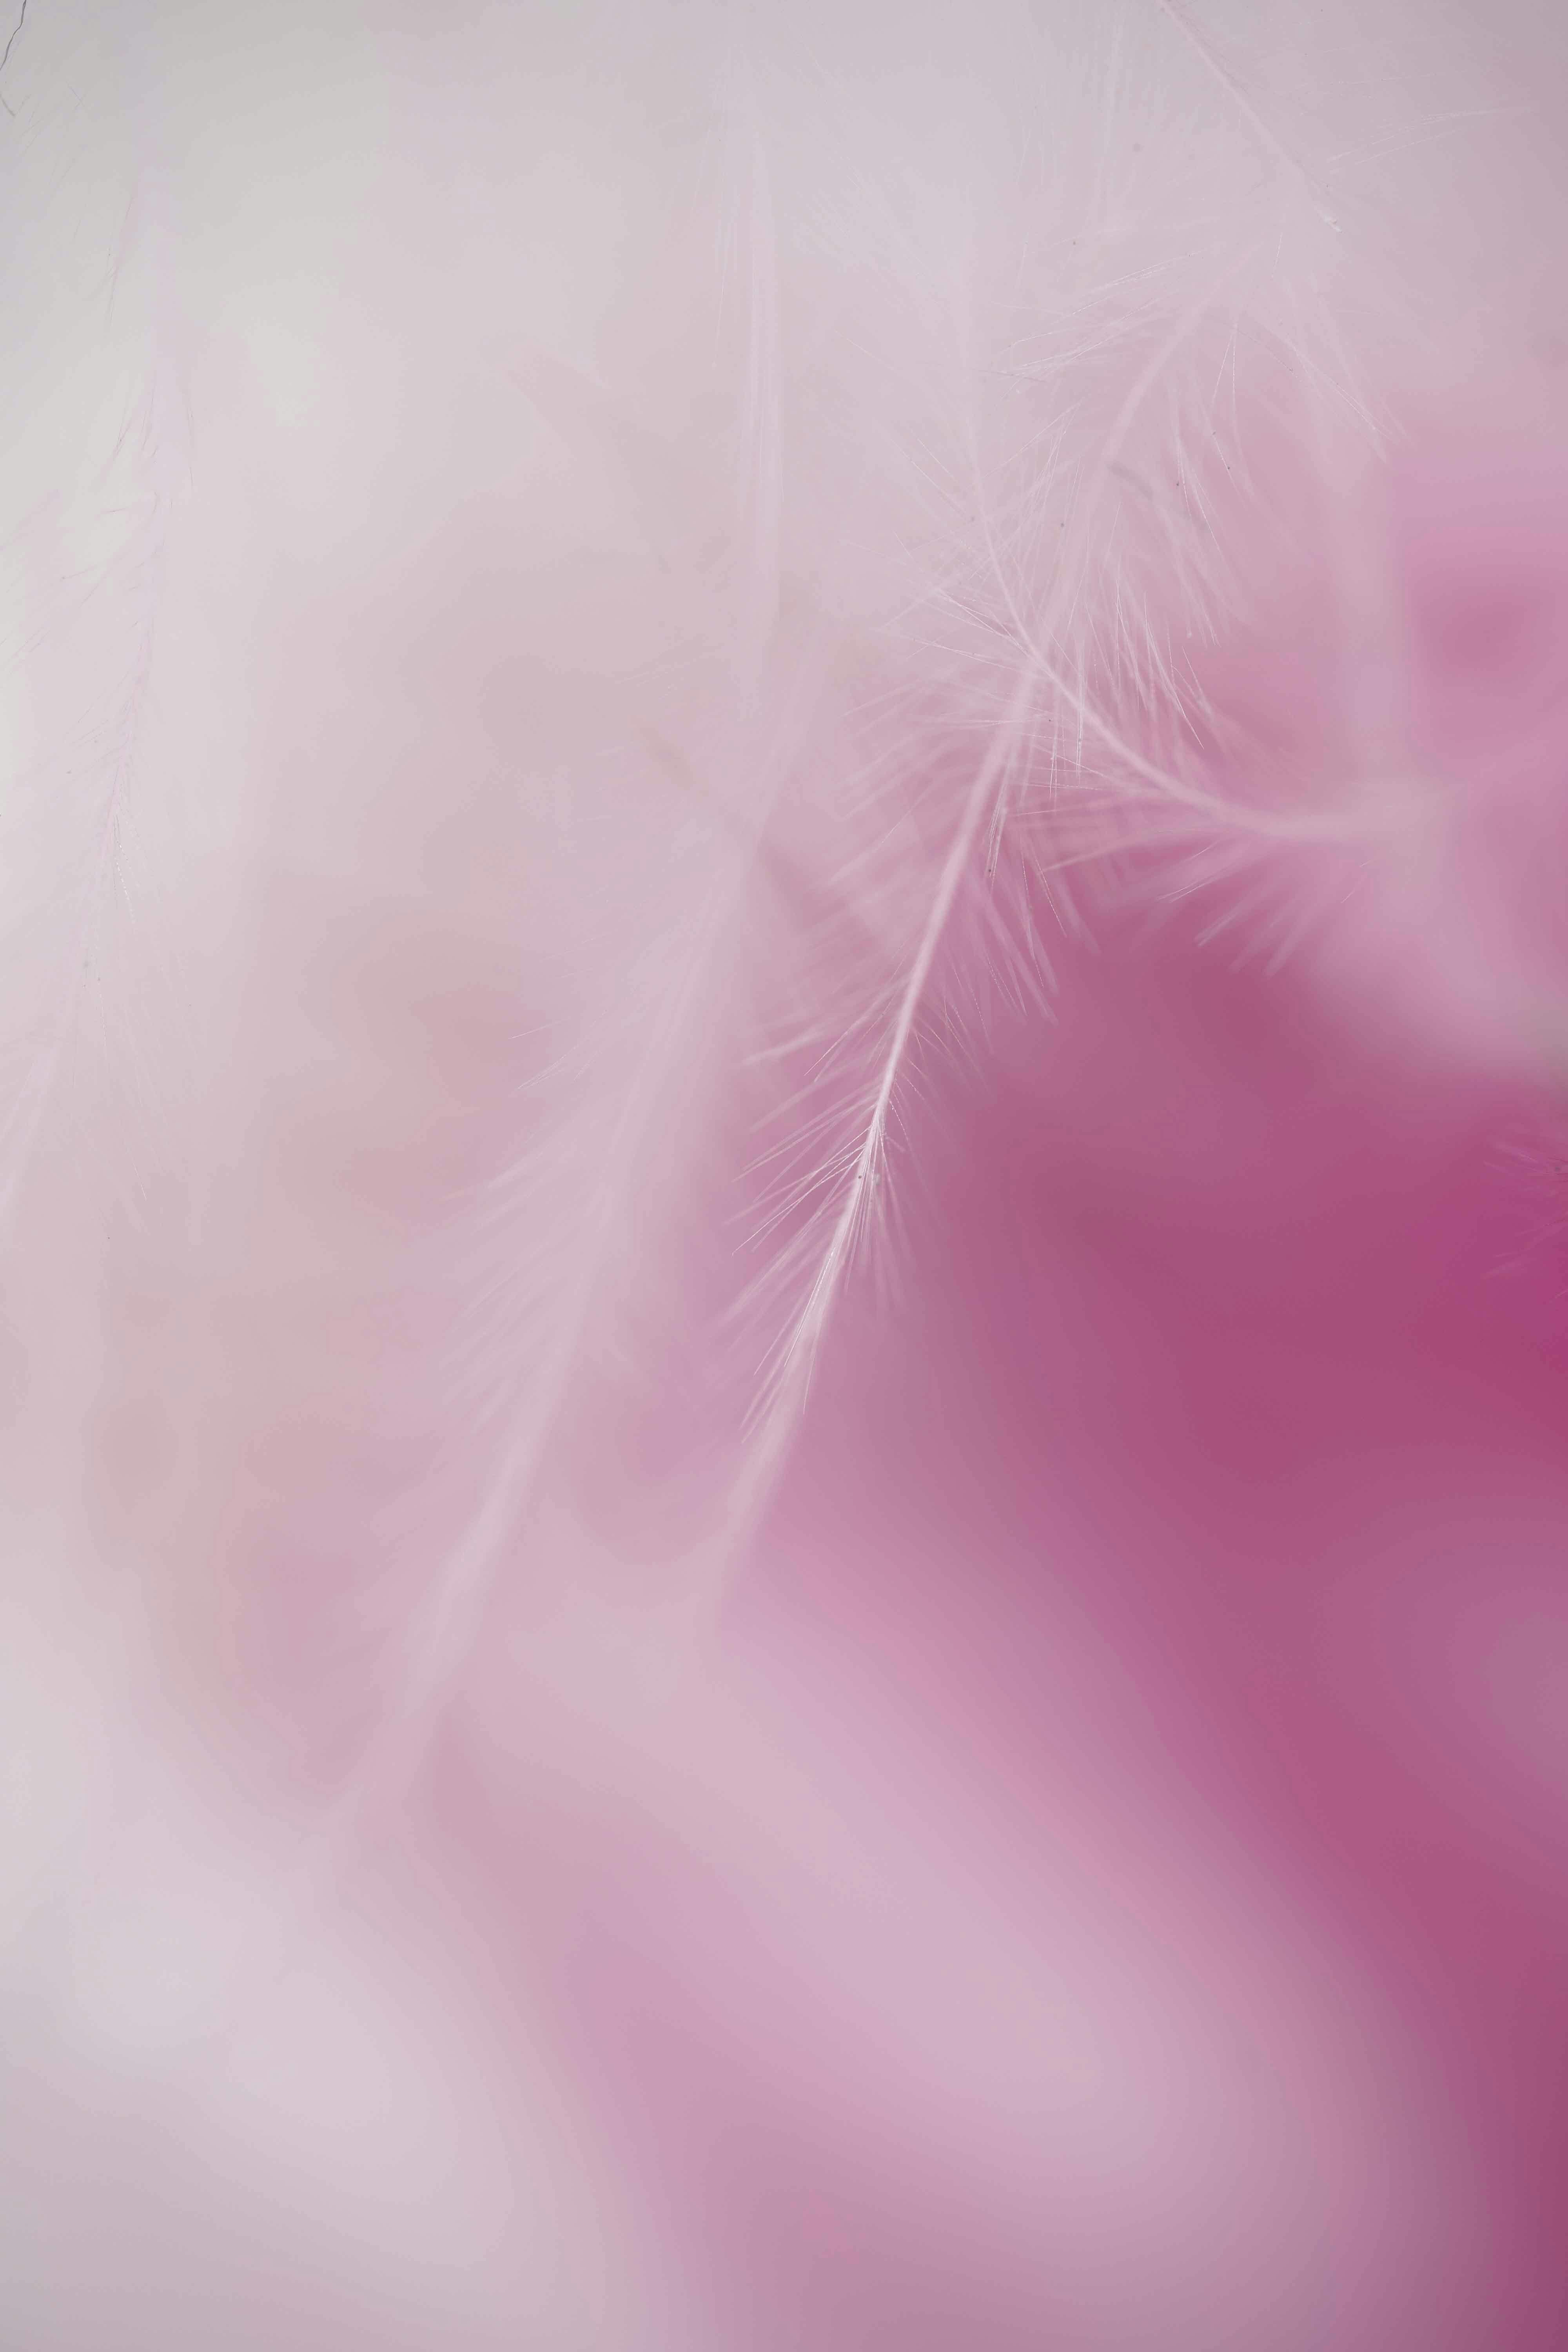 Pink Background, Photos, and Wallpaper for Free Download